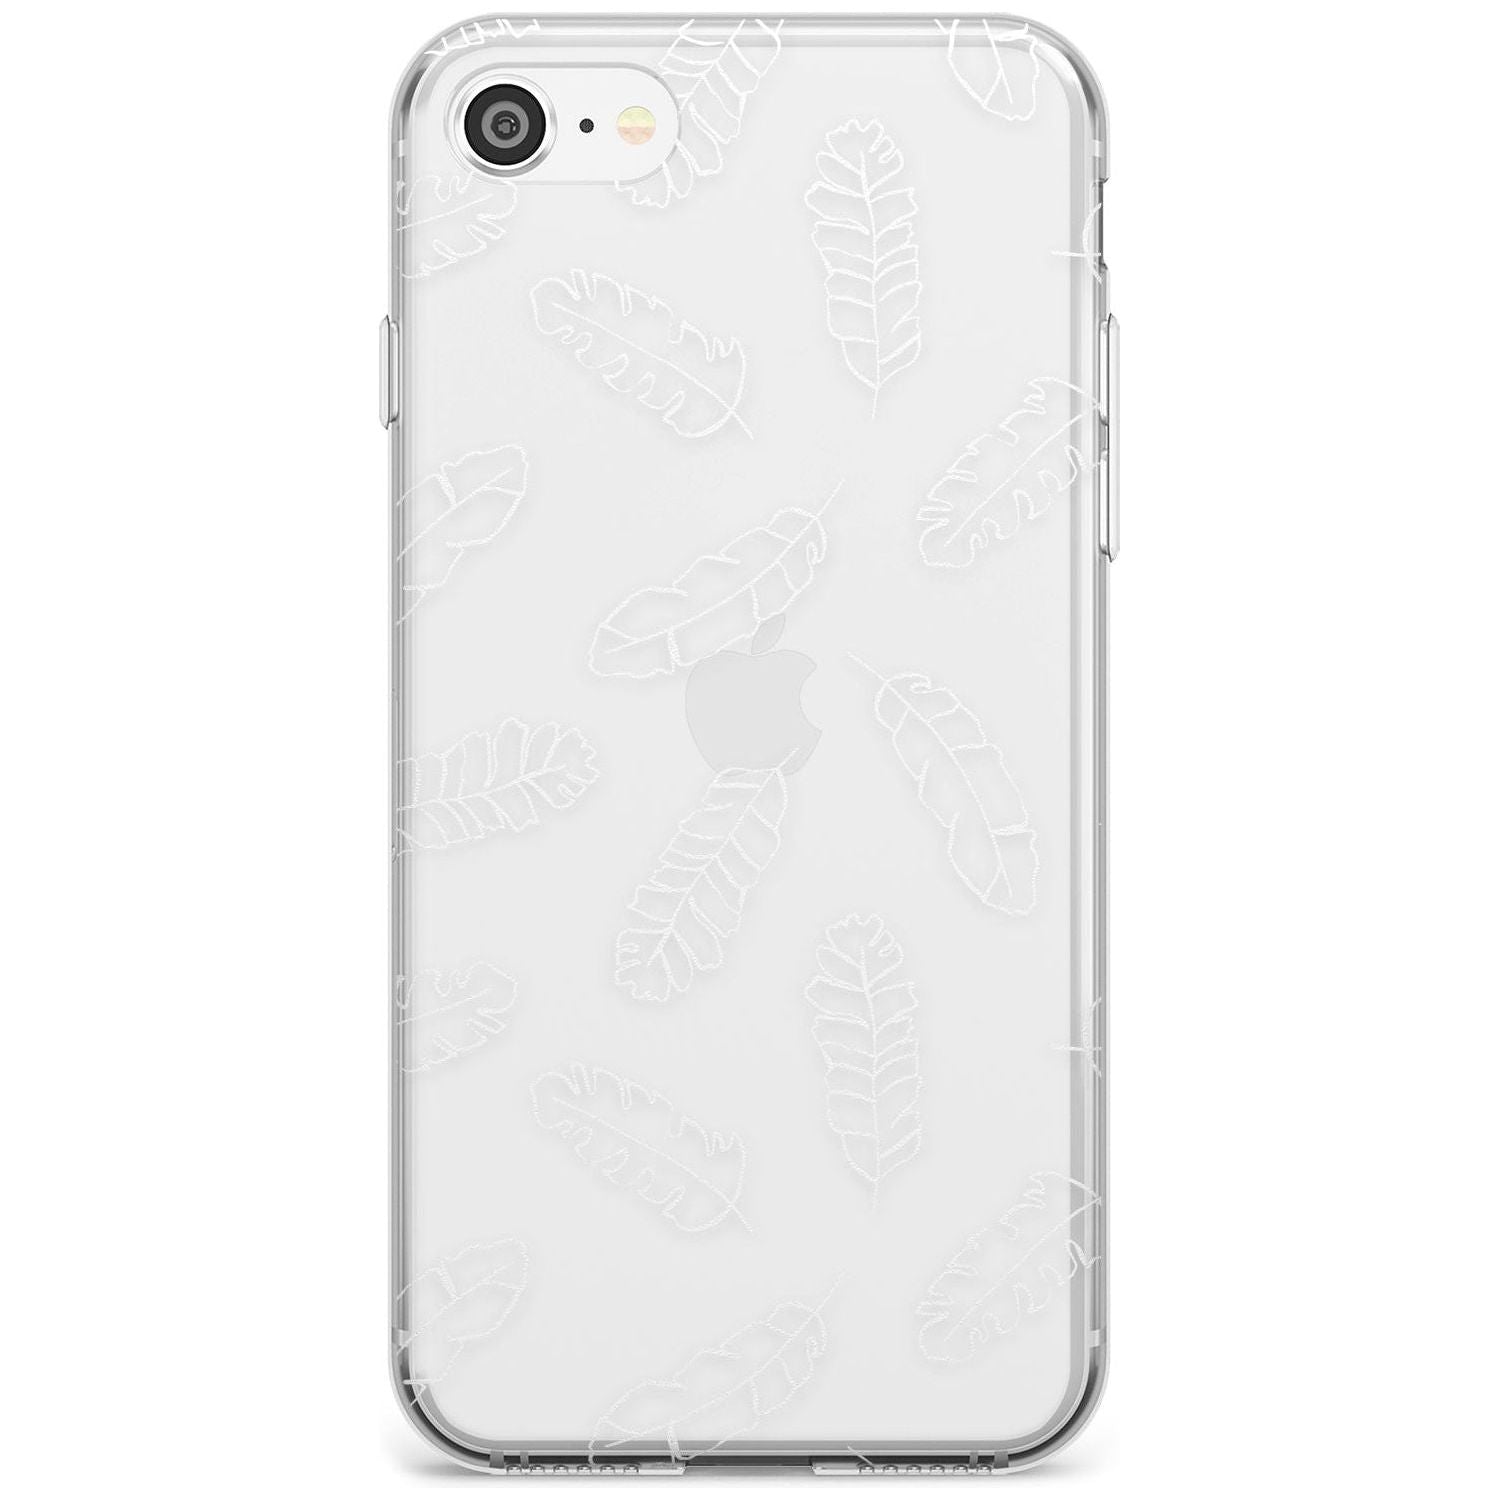 Clear Botanical Designs: Palm Leaves Black Impact Phone Case for iPhone SE 8 7 Plus